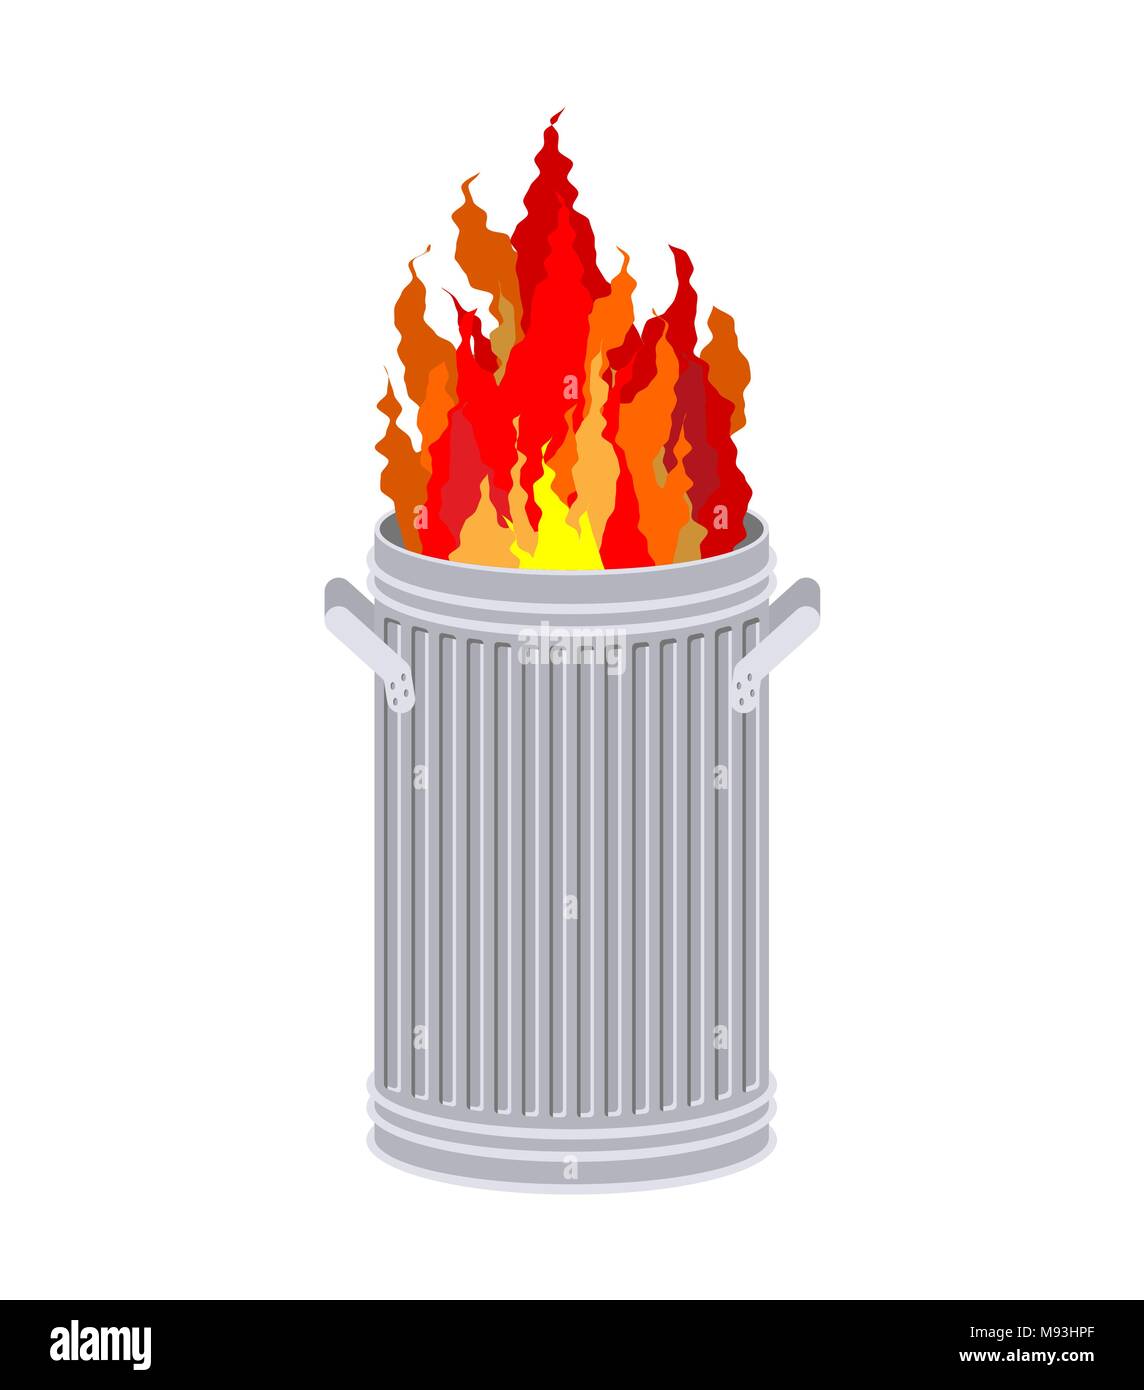 Fire In garbage can. Trash can burns. Stock Vector